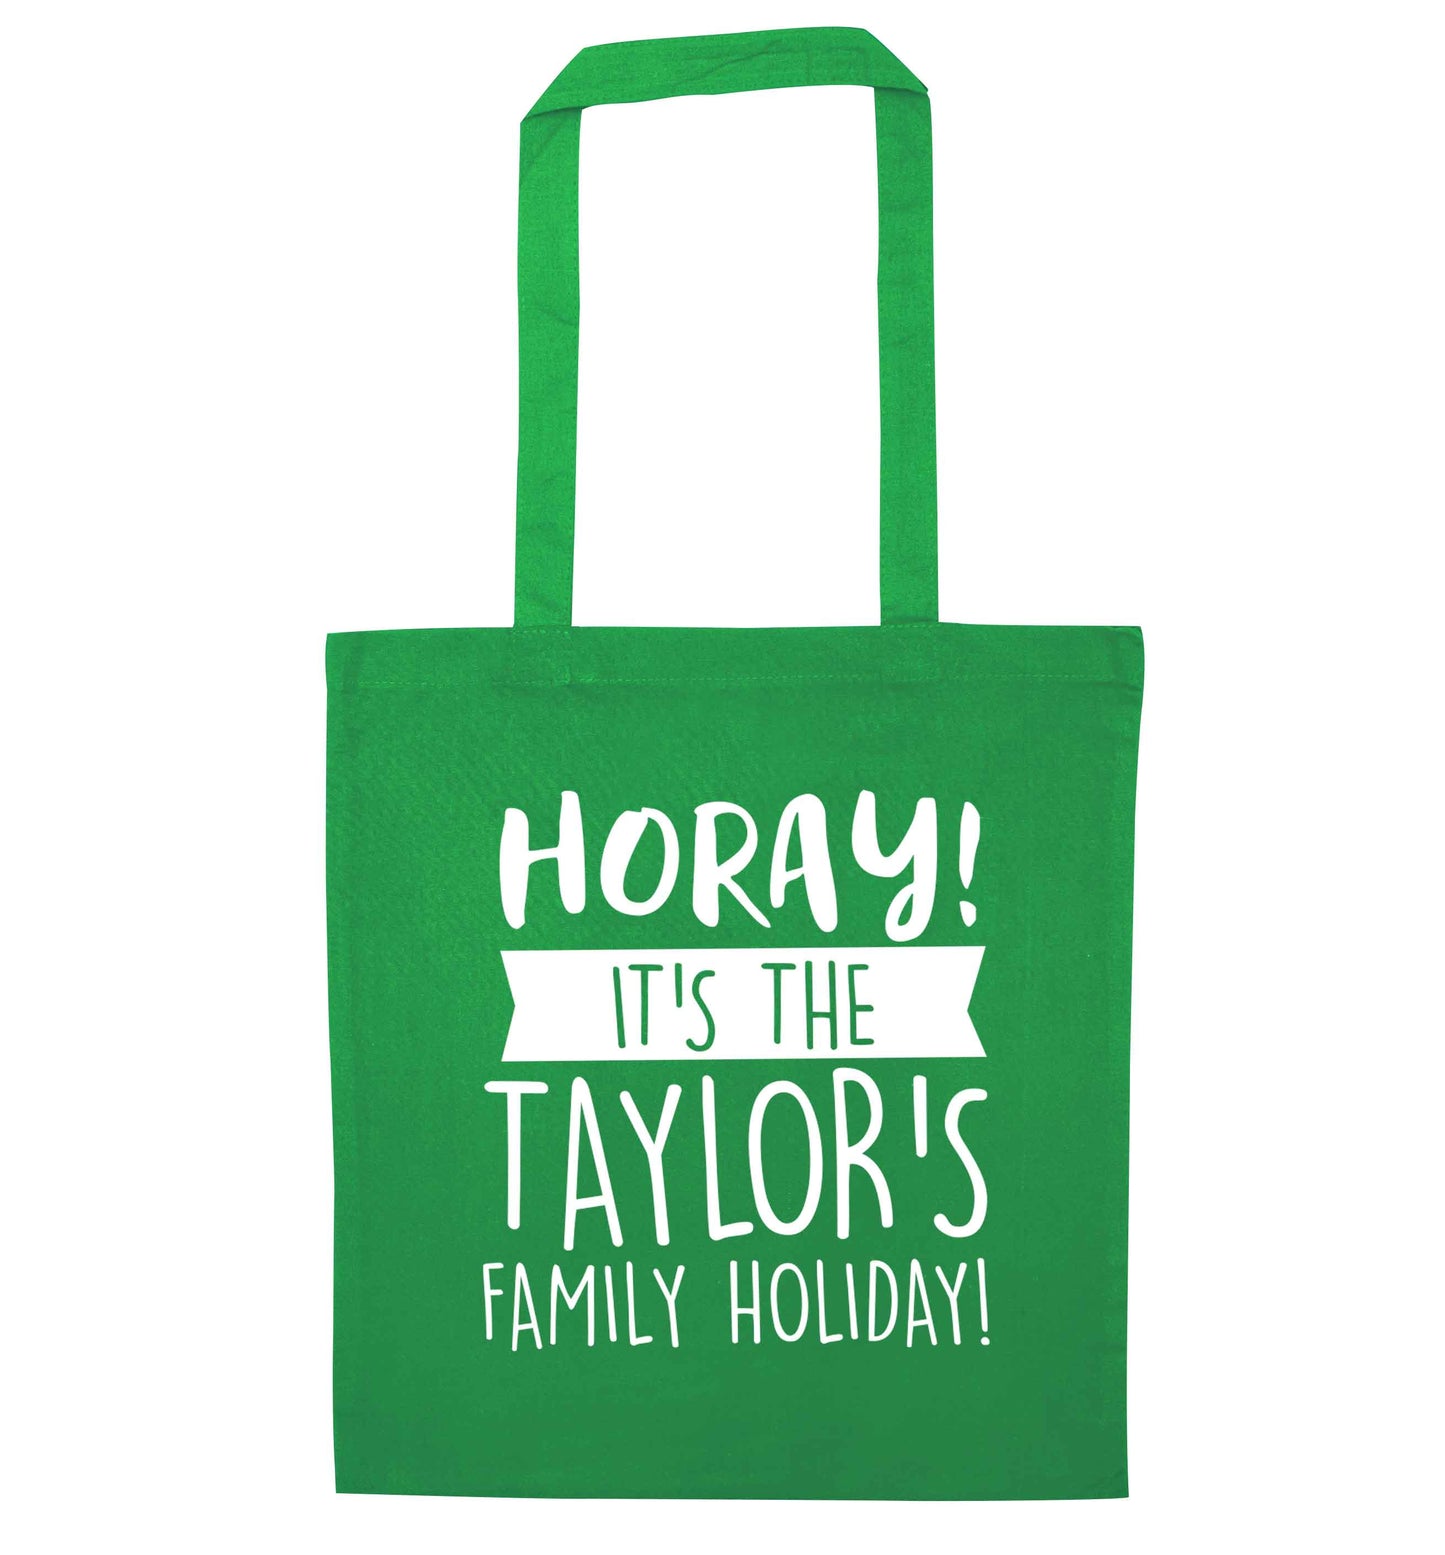 Horay it's the Taylor's family holiday! personalised item green tote bag